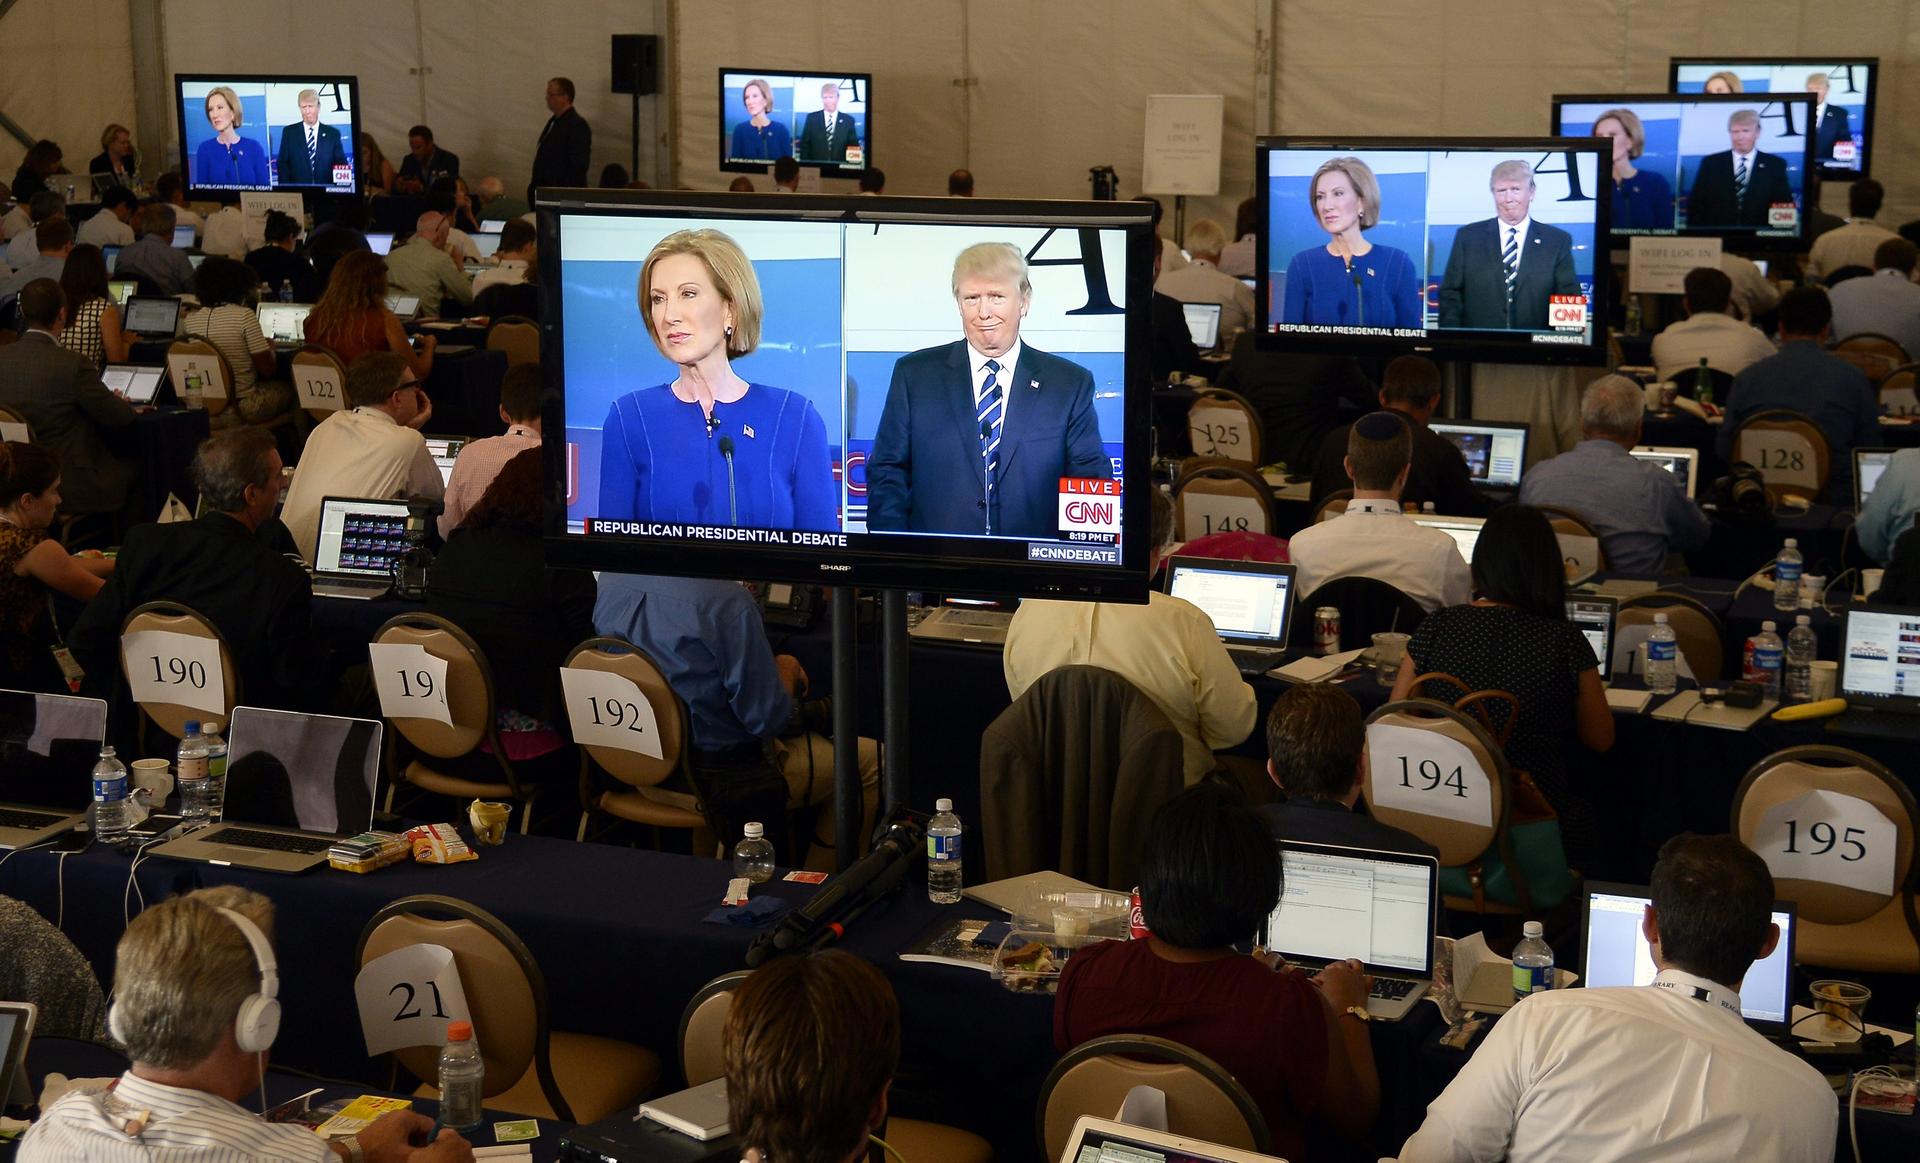 Media watch an exchange between US Republican presidential candidates Donald Trump and Carly Fiorina during the debate. Photo: EPA